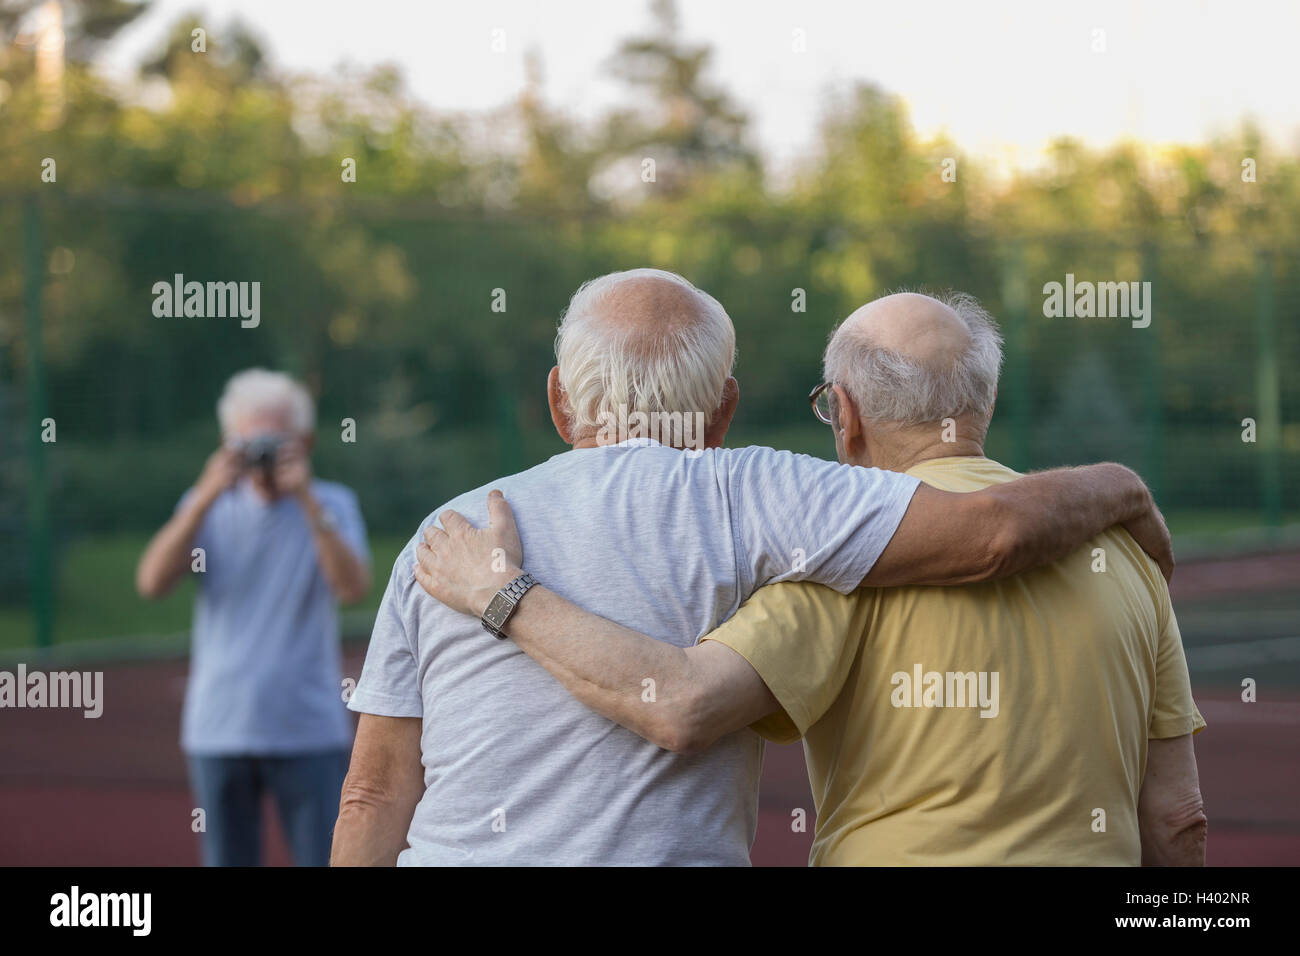 Rear view of friends standing with arm around while man photographing in background Stock Photo